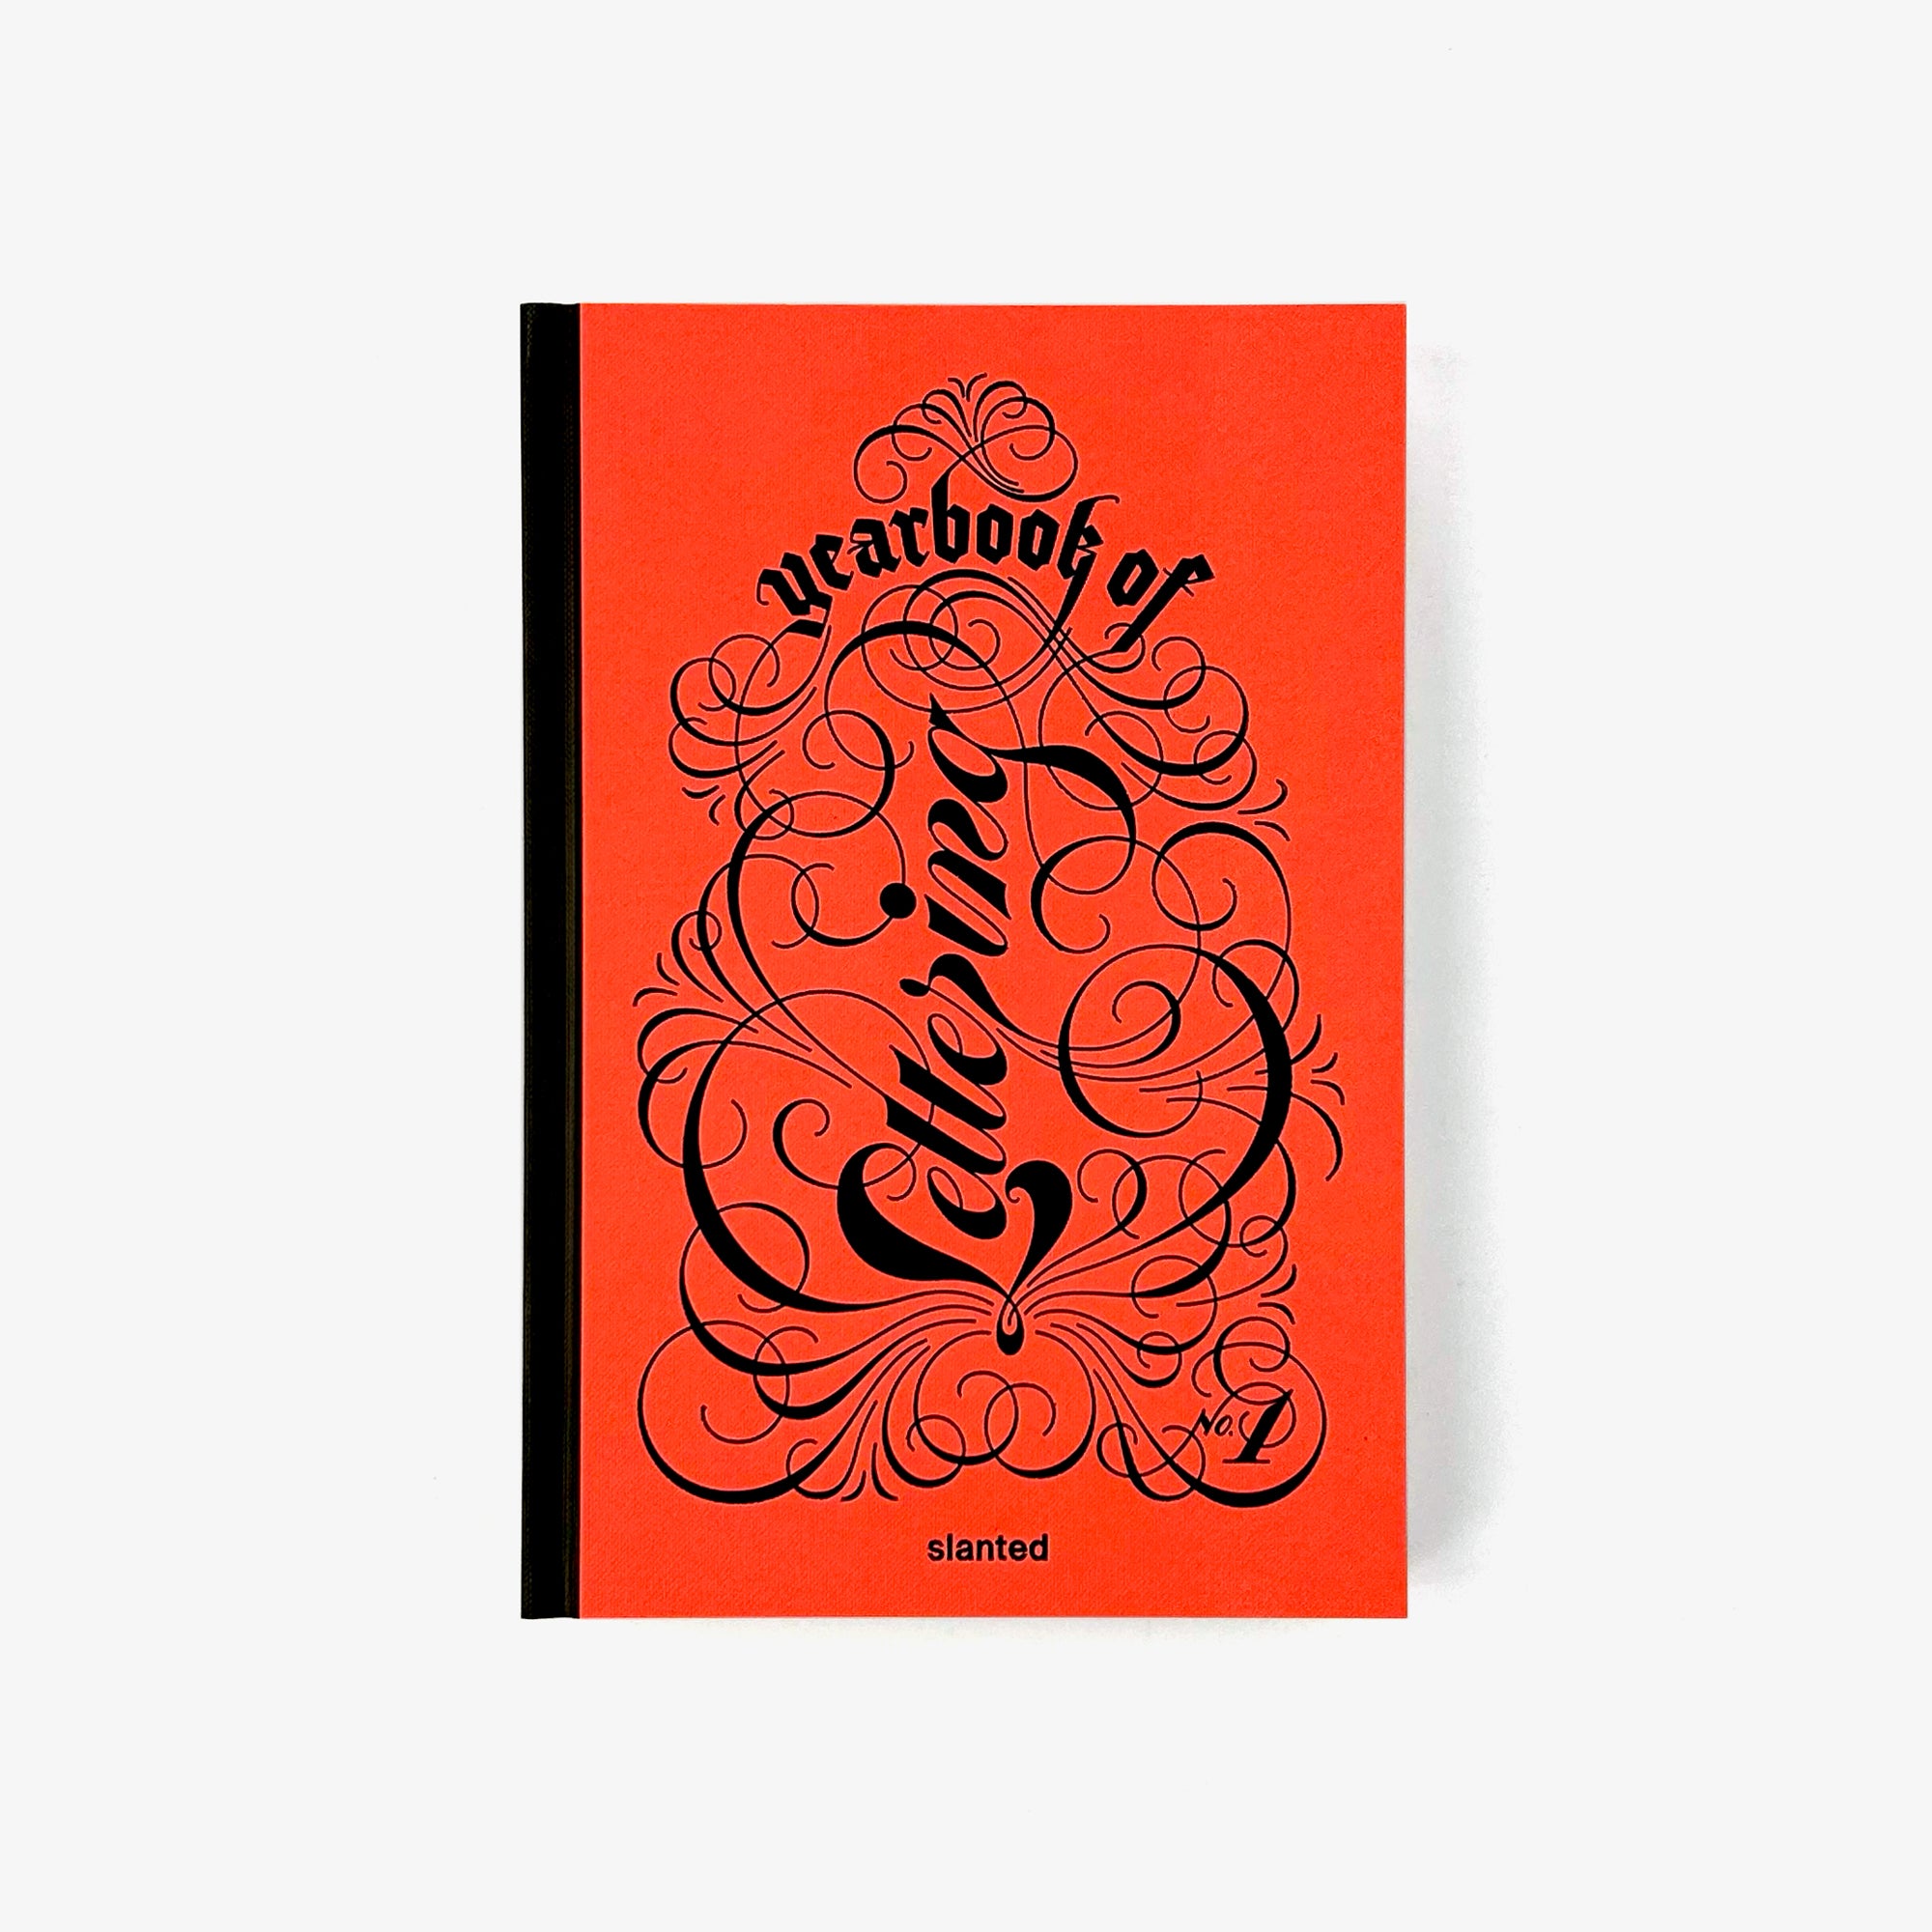 Year Book of Lettering